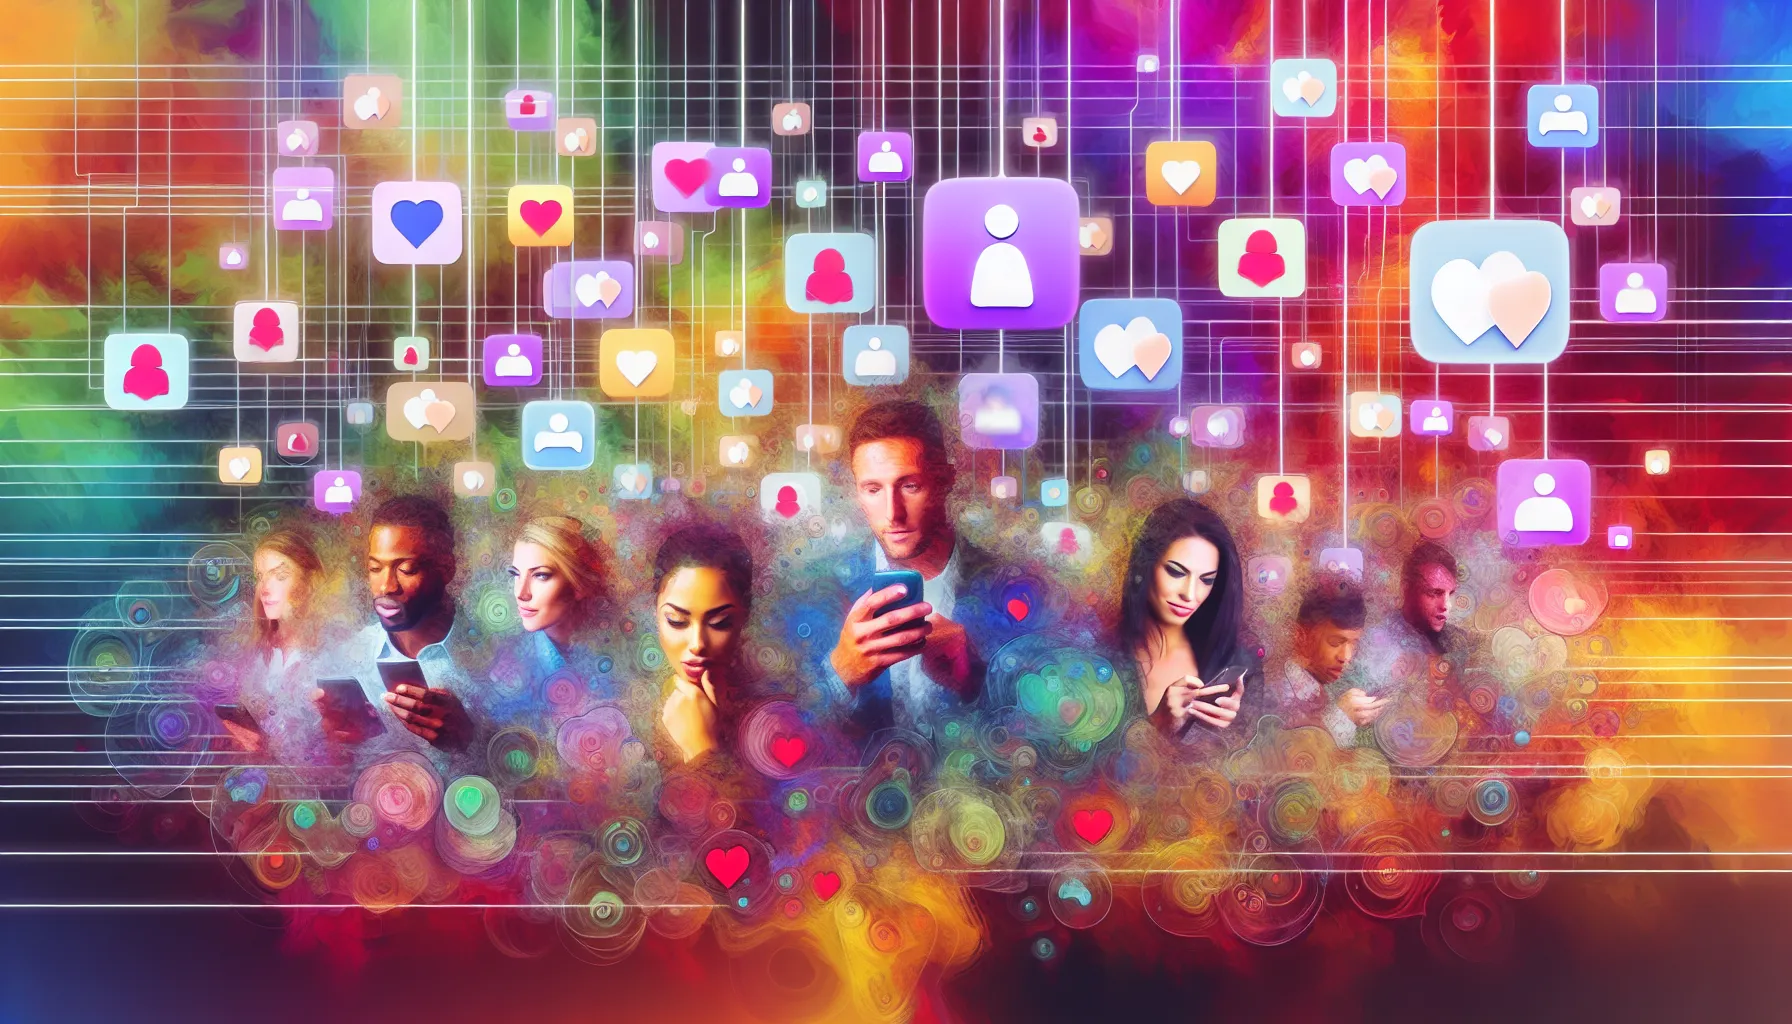 The vibrant hustle of modern dating, surrounded by app icons, reflecting anticipation and complexity.